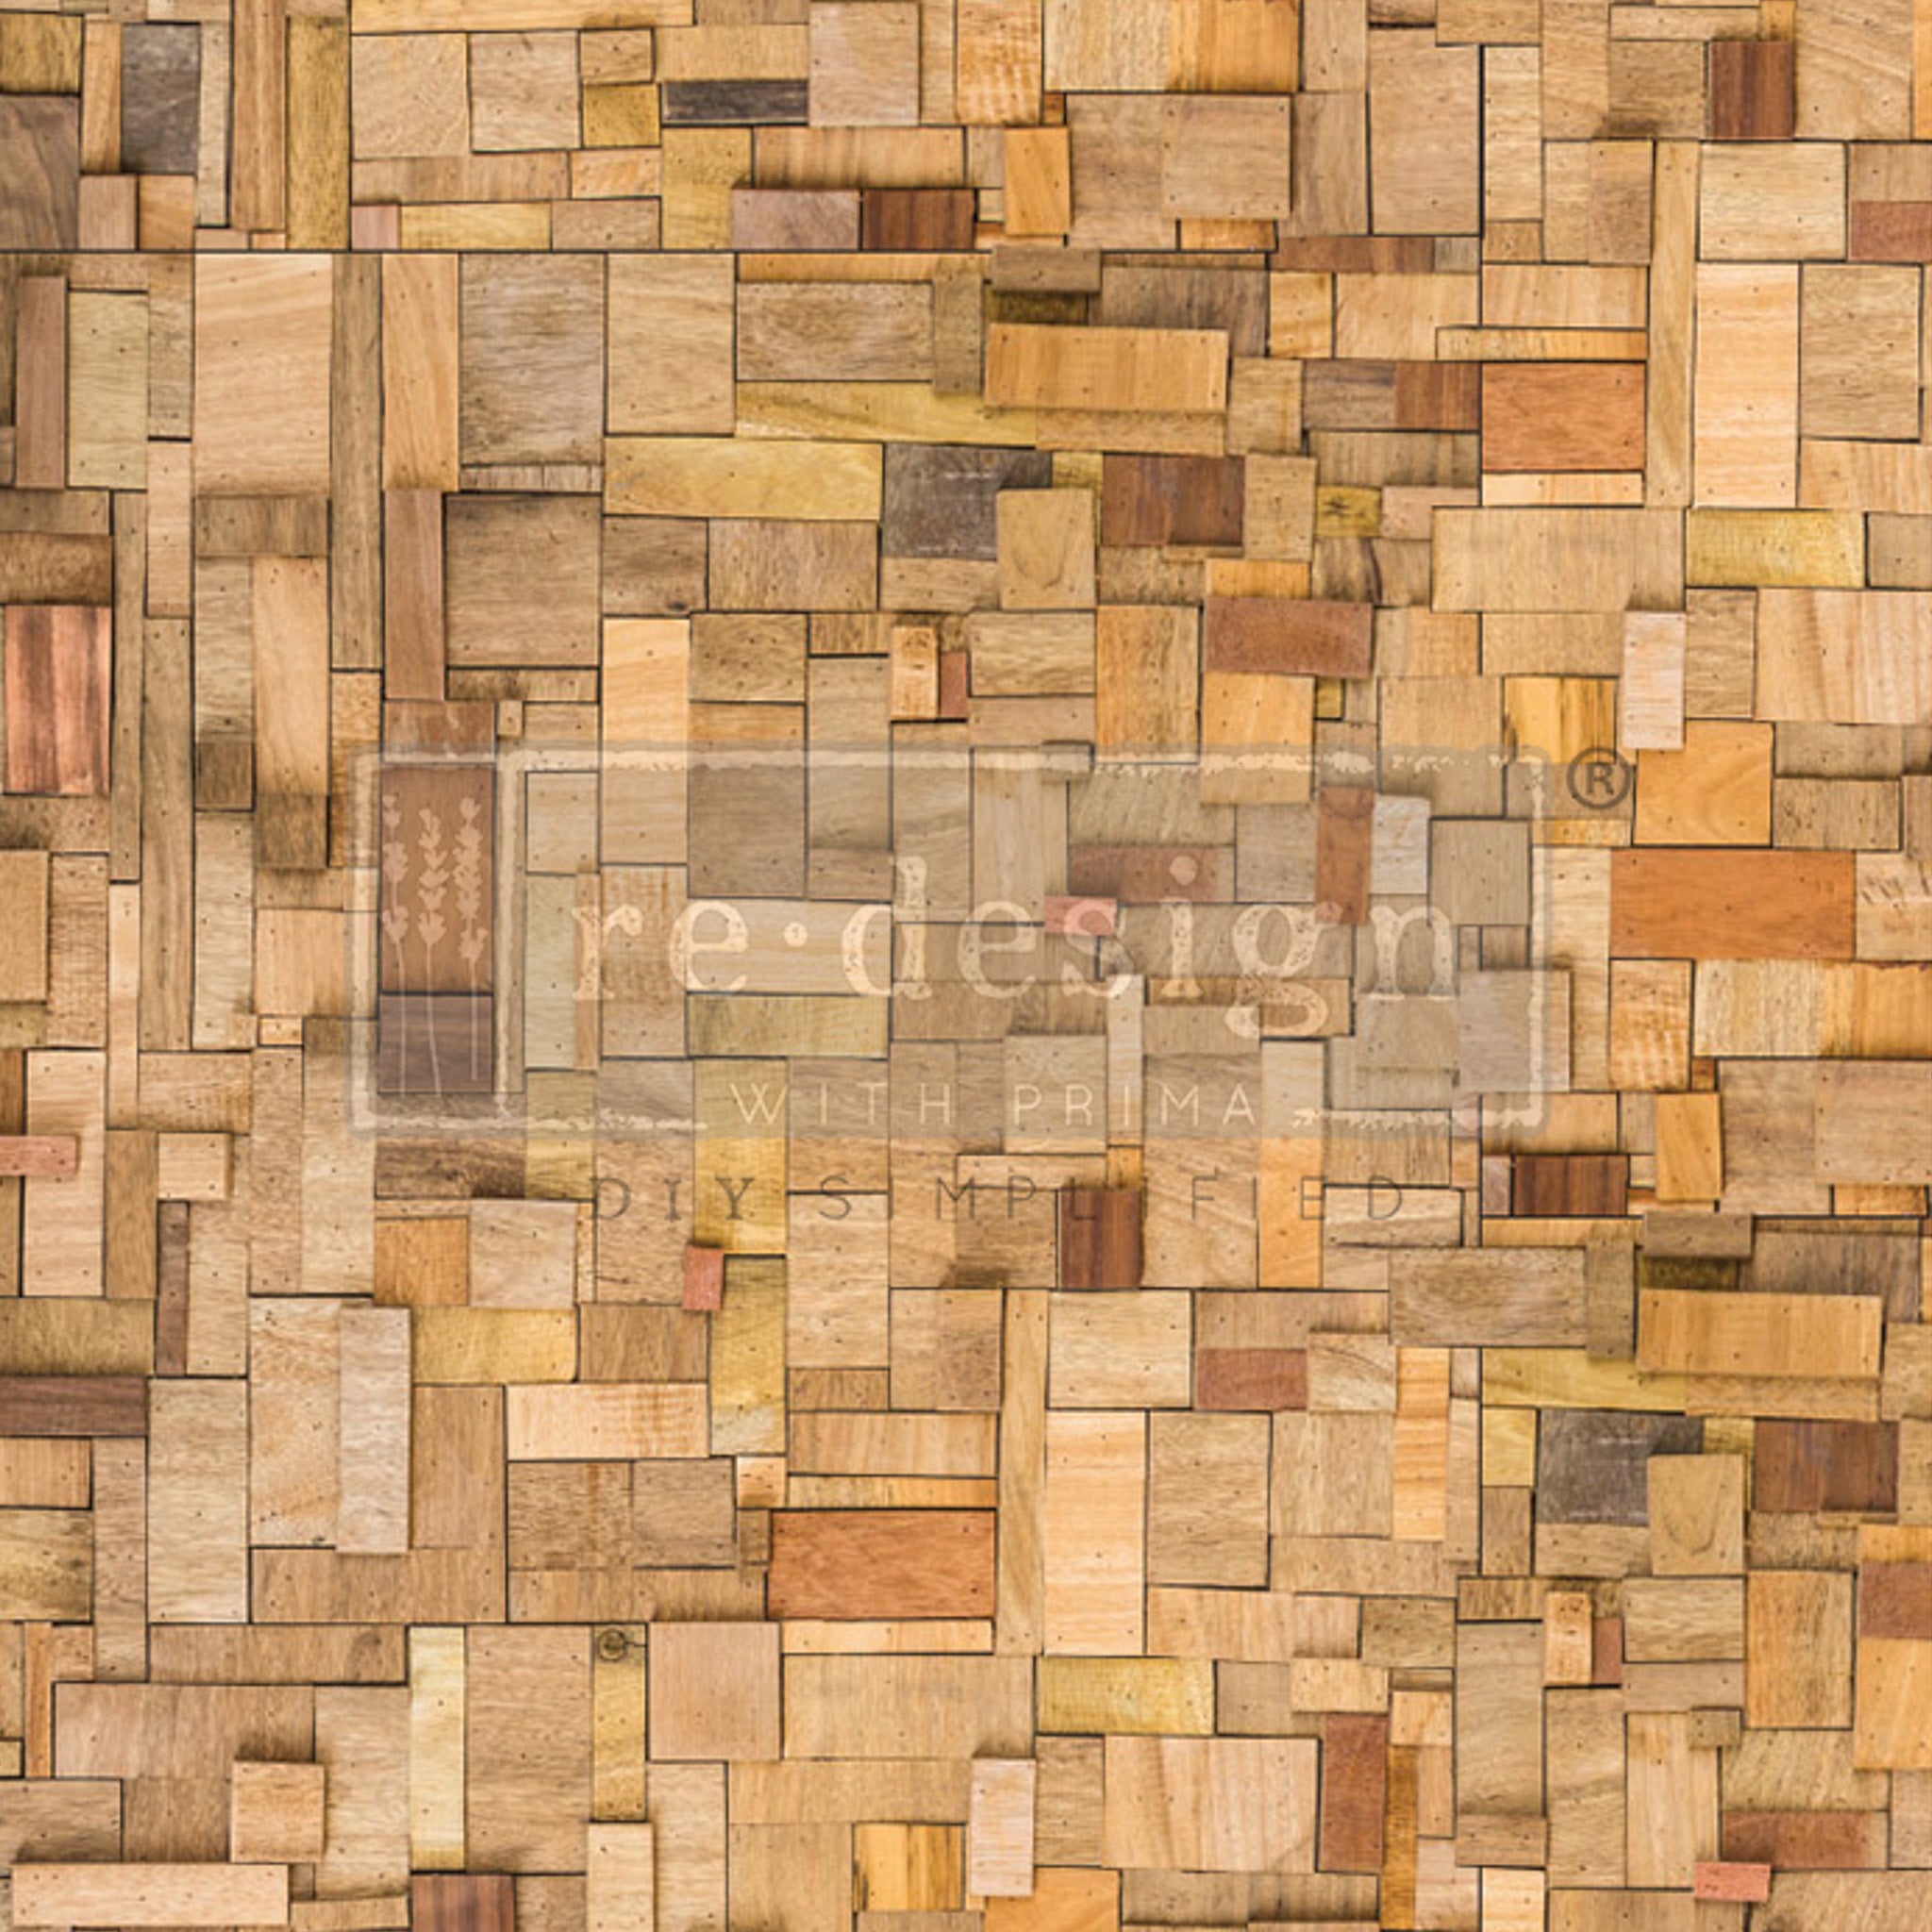 A1 fiber paper design that features a patchwork of wood tiles in various sizes.